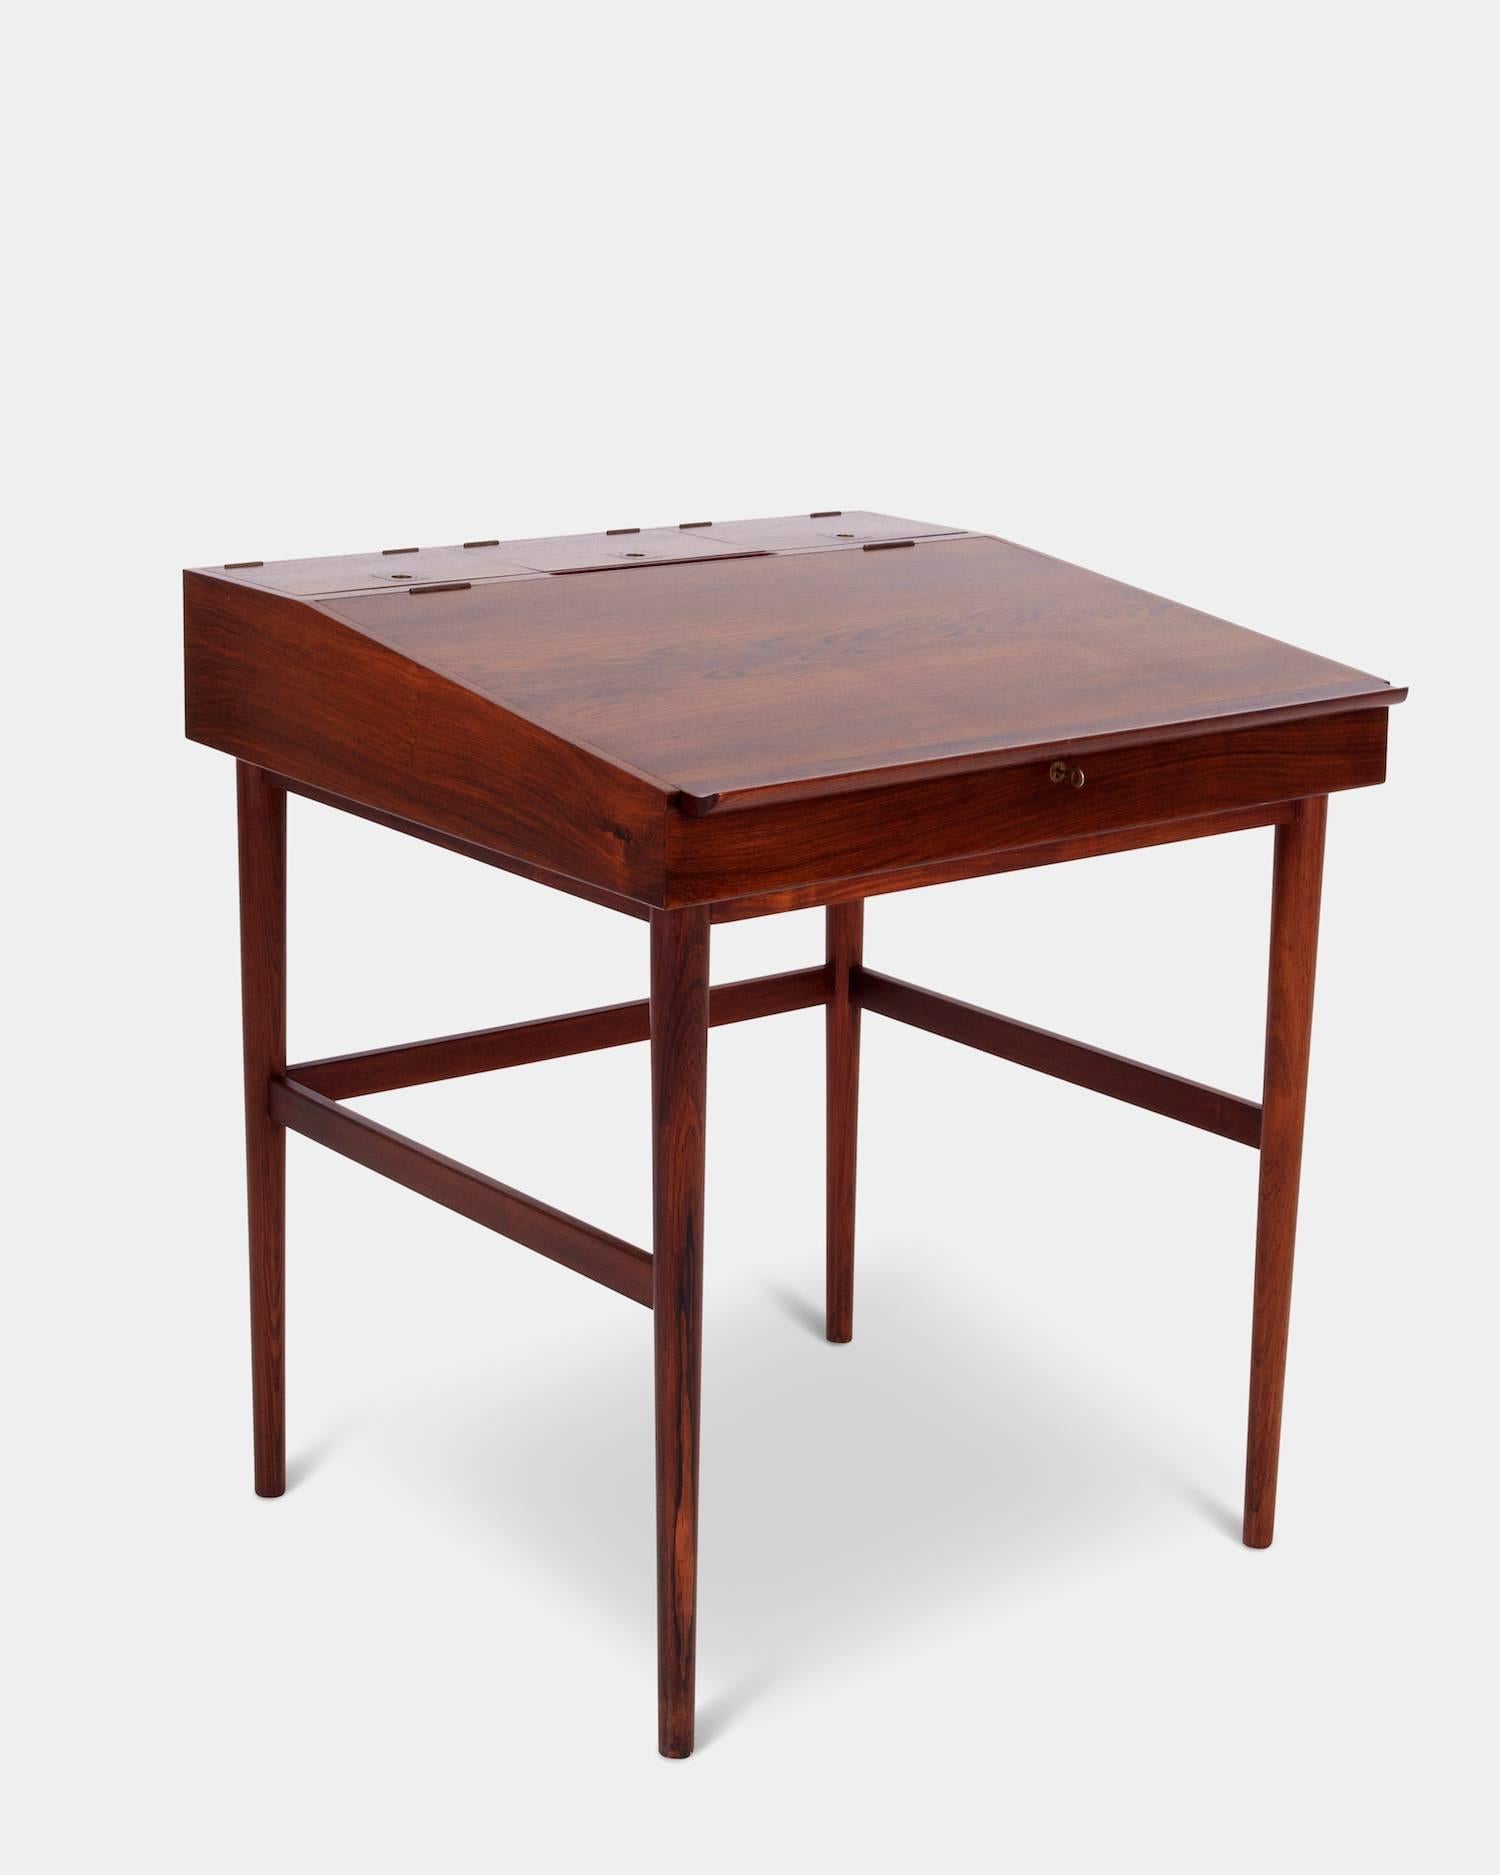 Model NV-40
A solid and veneerd rosewood writing desk.
Tabletop with flaps covering one large and three small compartments for storage. 
Brass handles and fittings, key included. Round tapered legs with stretchers 
Manufactured by Niels Vodder.